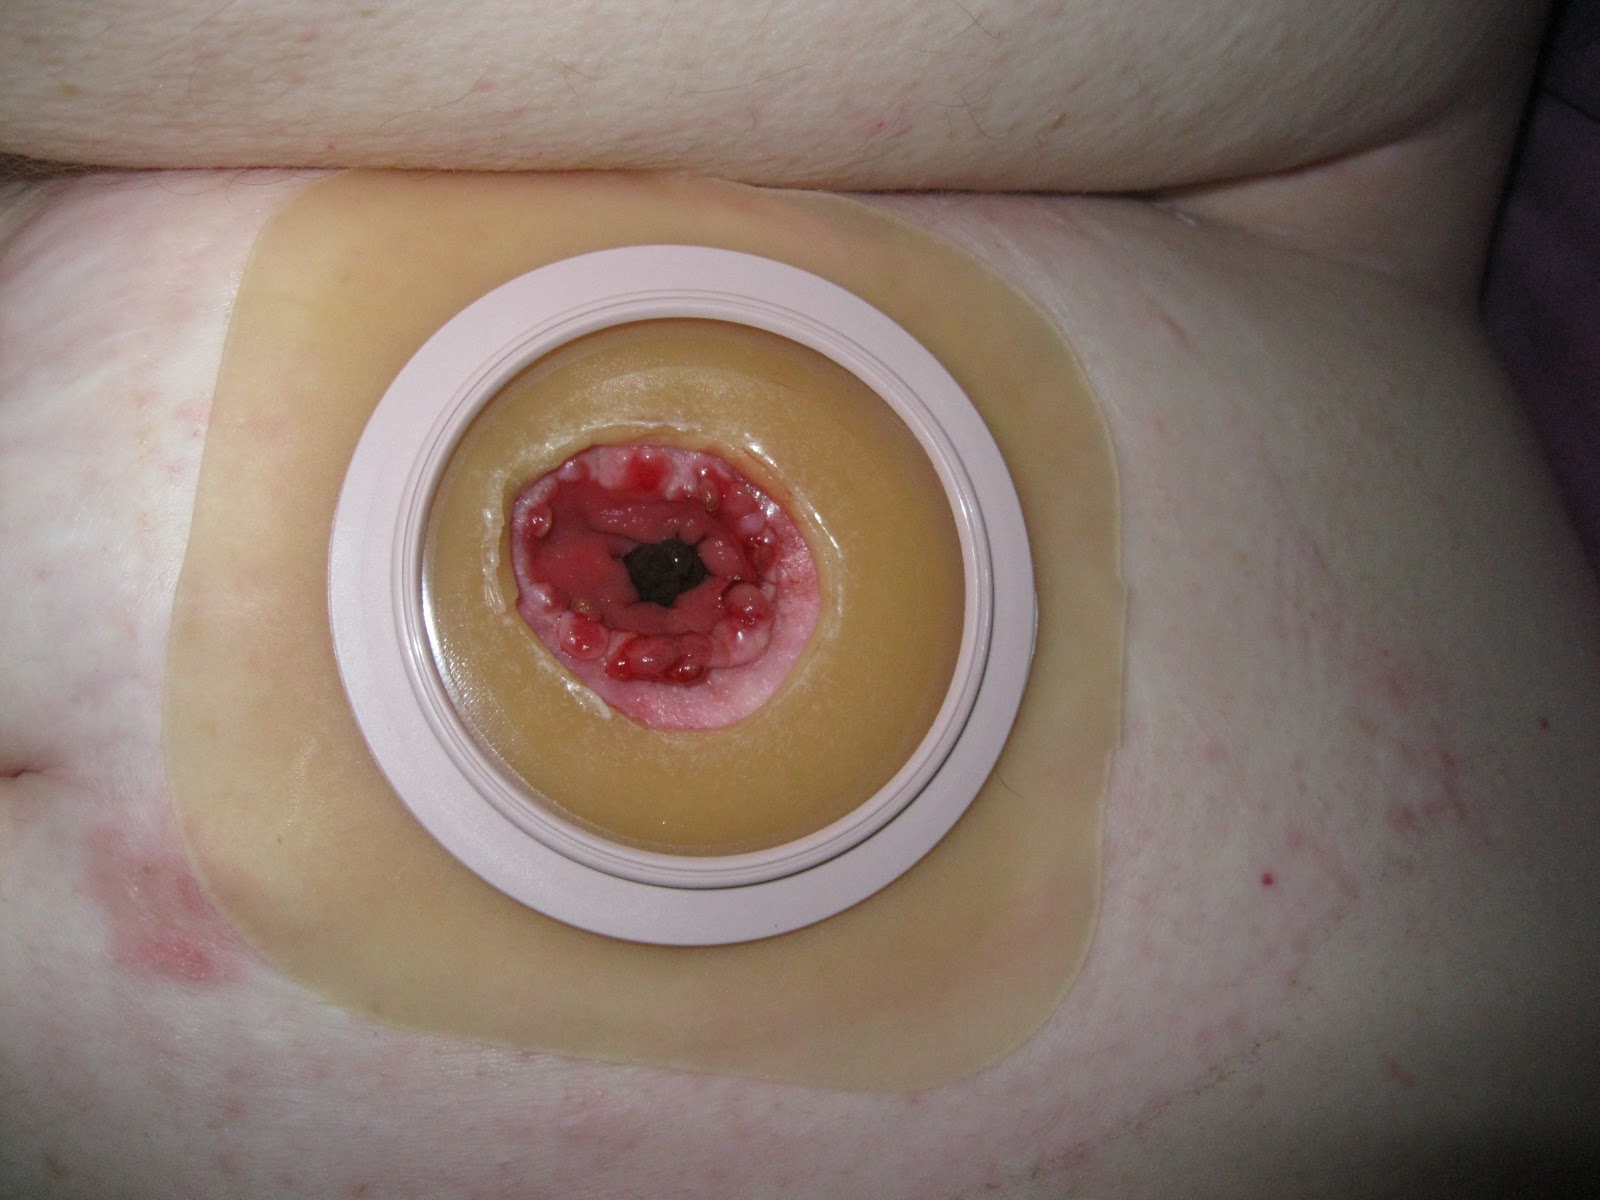 Wafer and putty applied to stoma. 